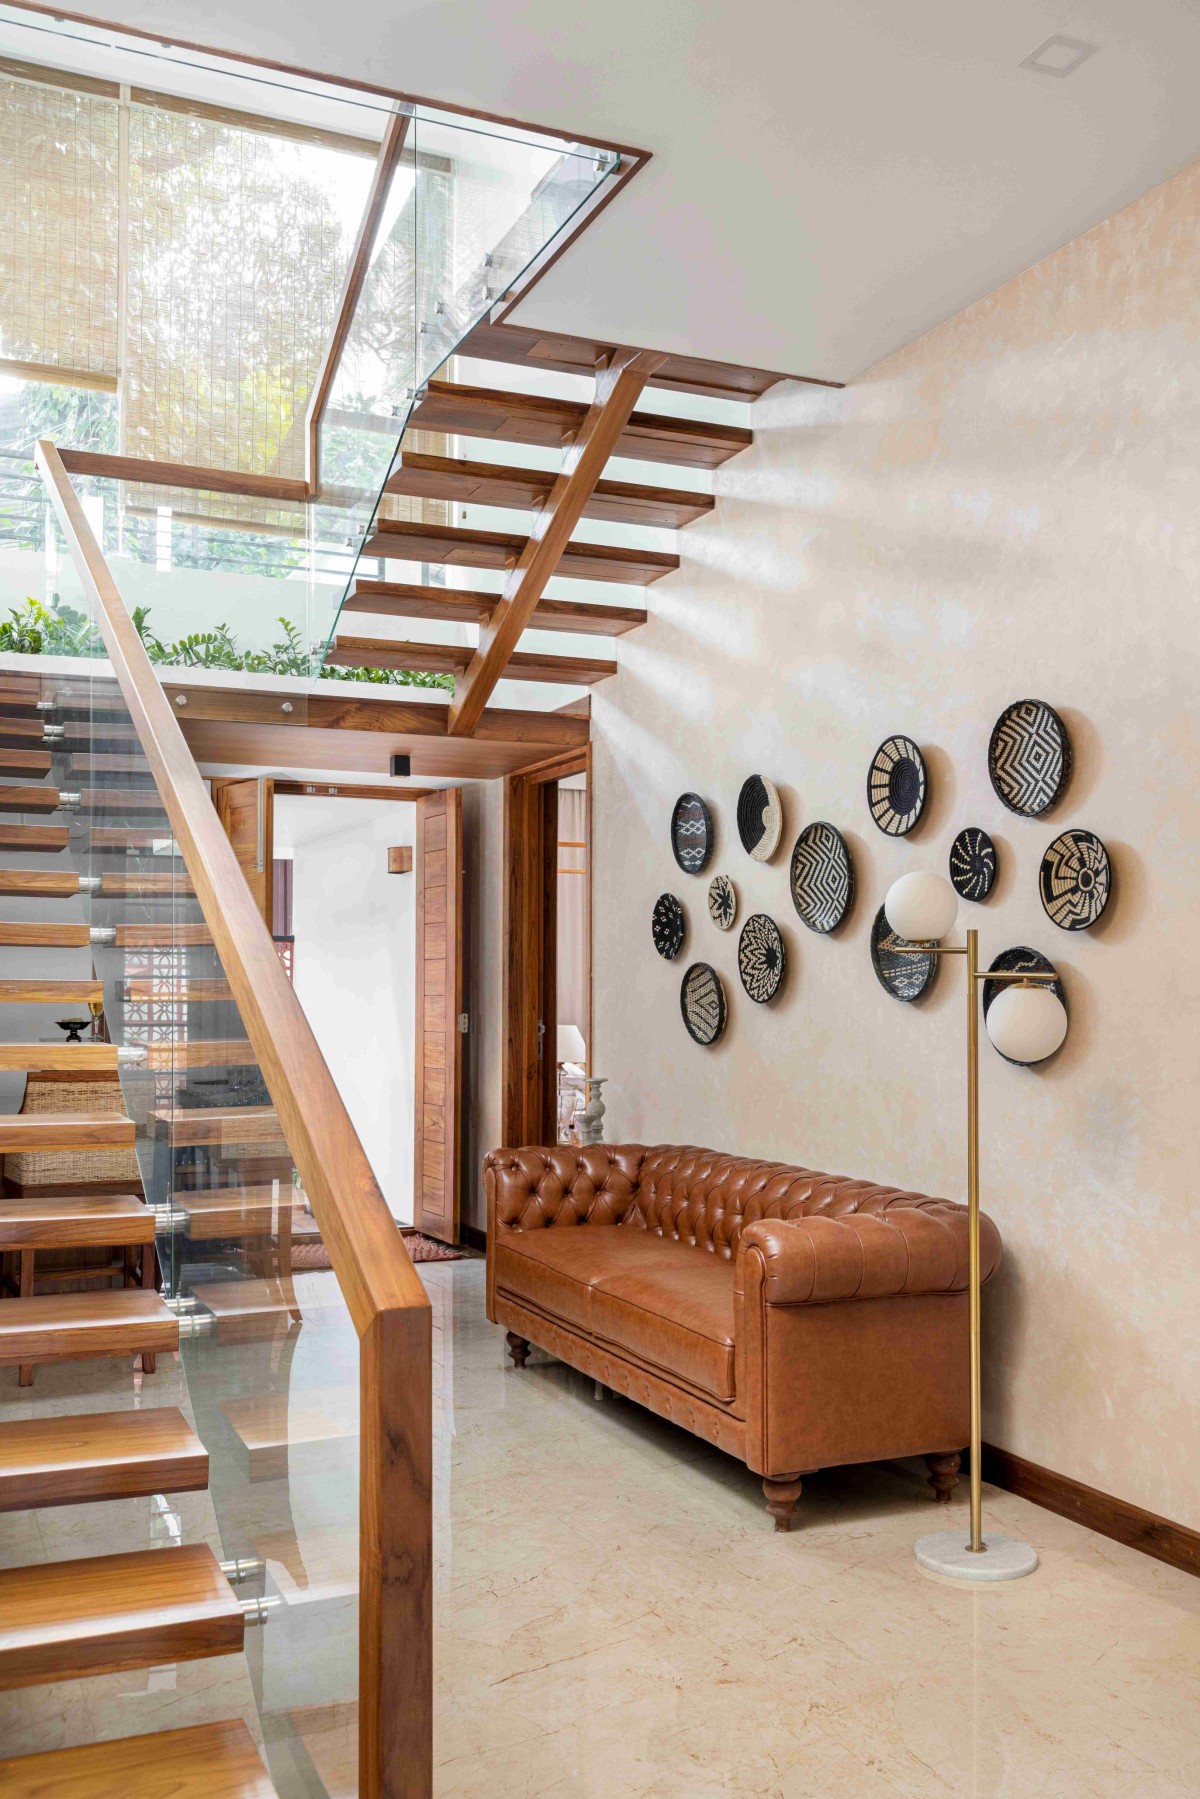 Seating area and Staircase of Anu Joseph Residence by Temple Town